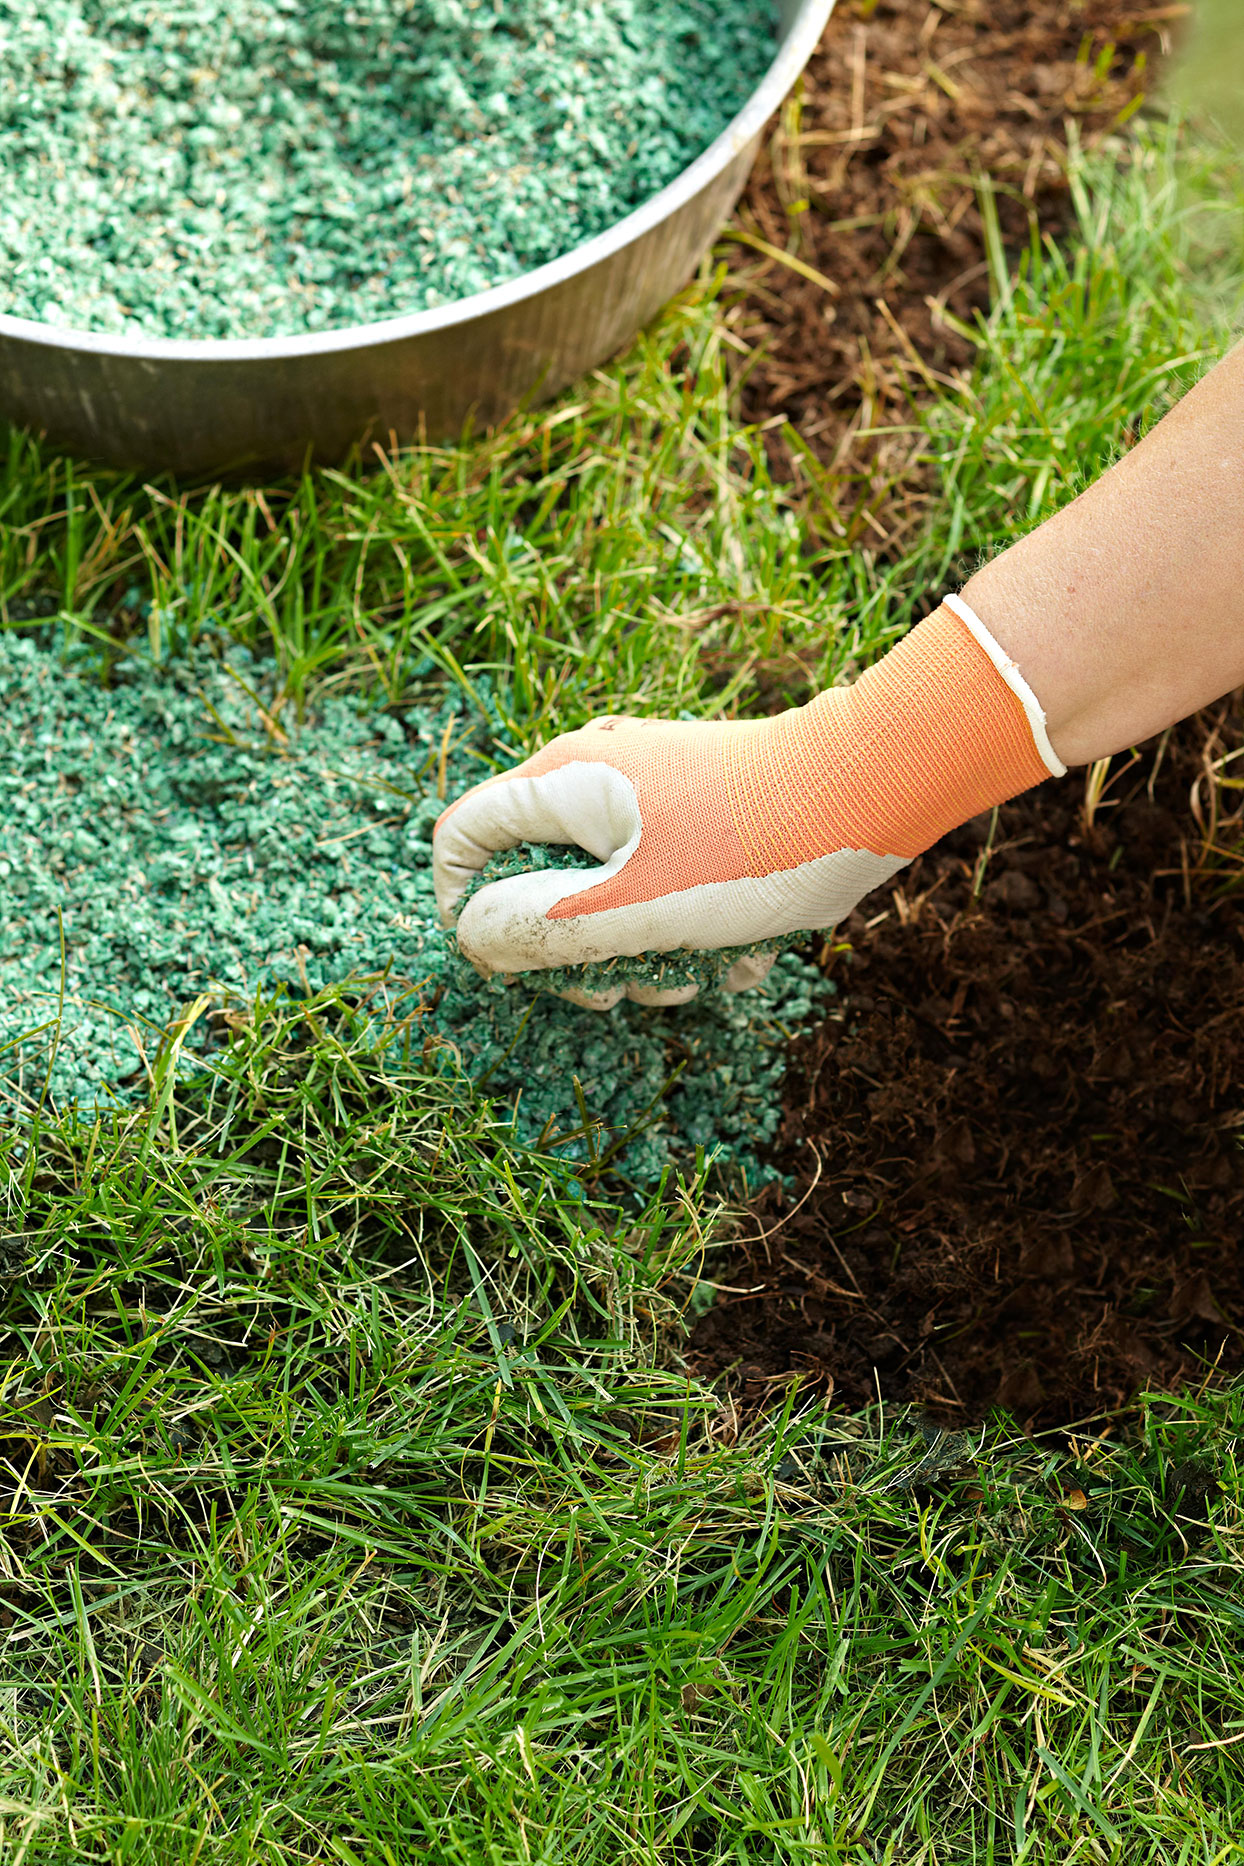 Fertilize Your Lawn Without Any Chemicals